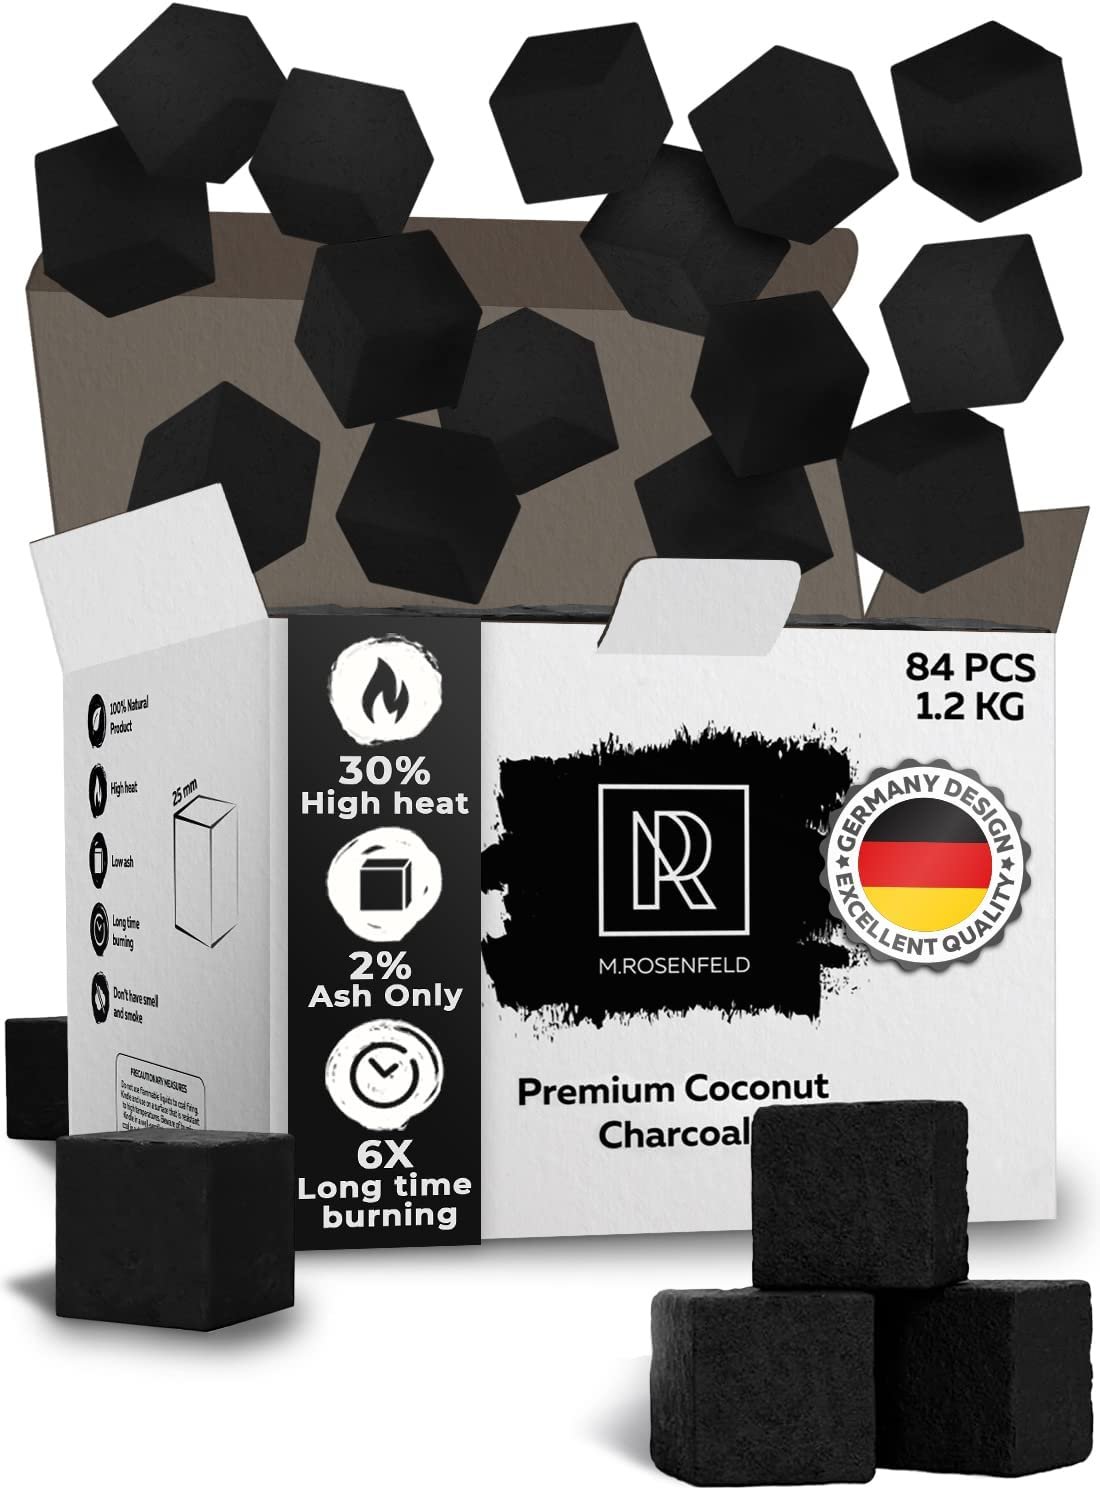 XL Pack 84 Coconut Charcoal Hookah Coals - 1.2 KG White Value Pack Size - 100% Natural - 25mm Cubes - Free Shipping